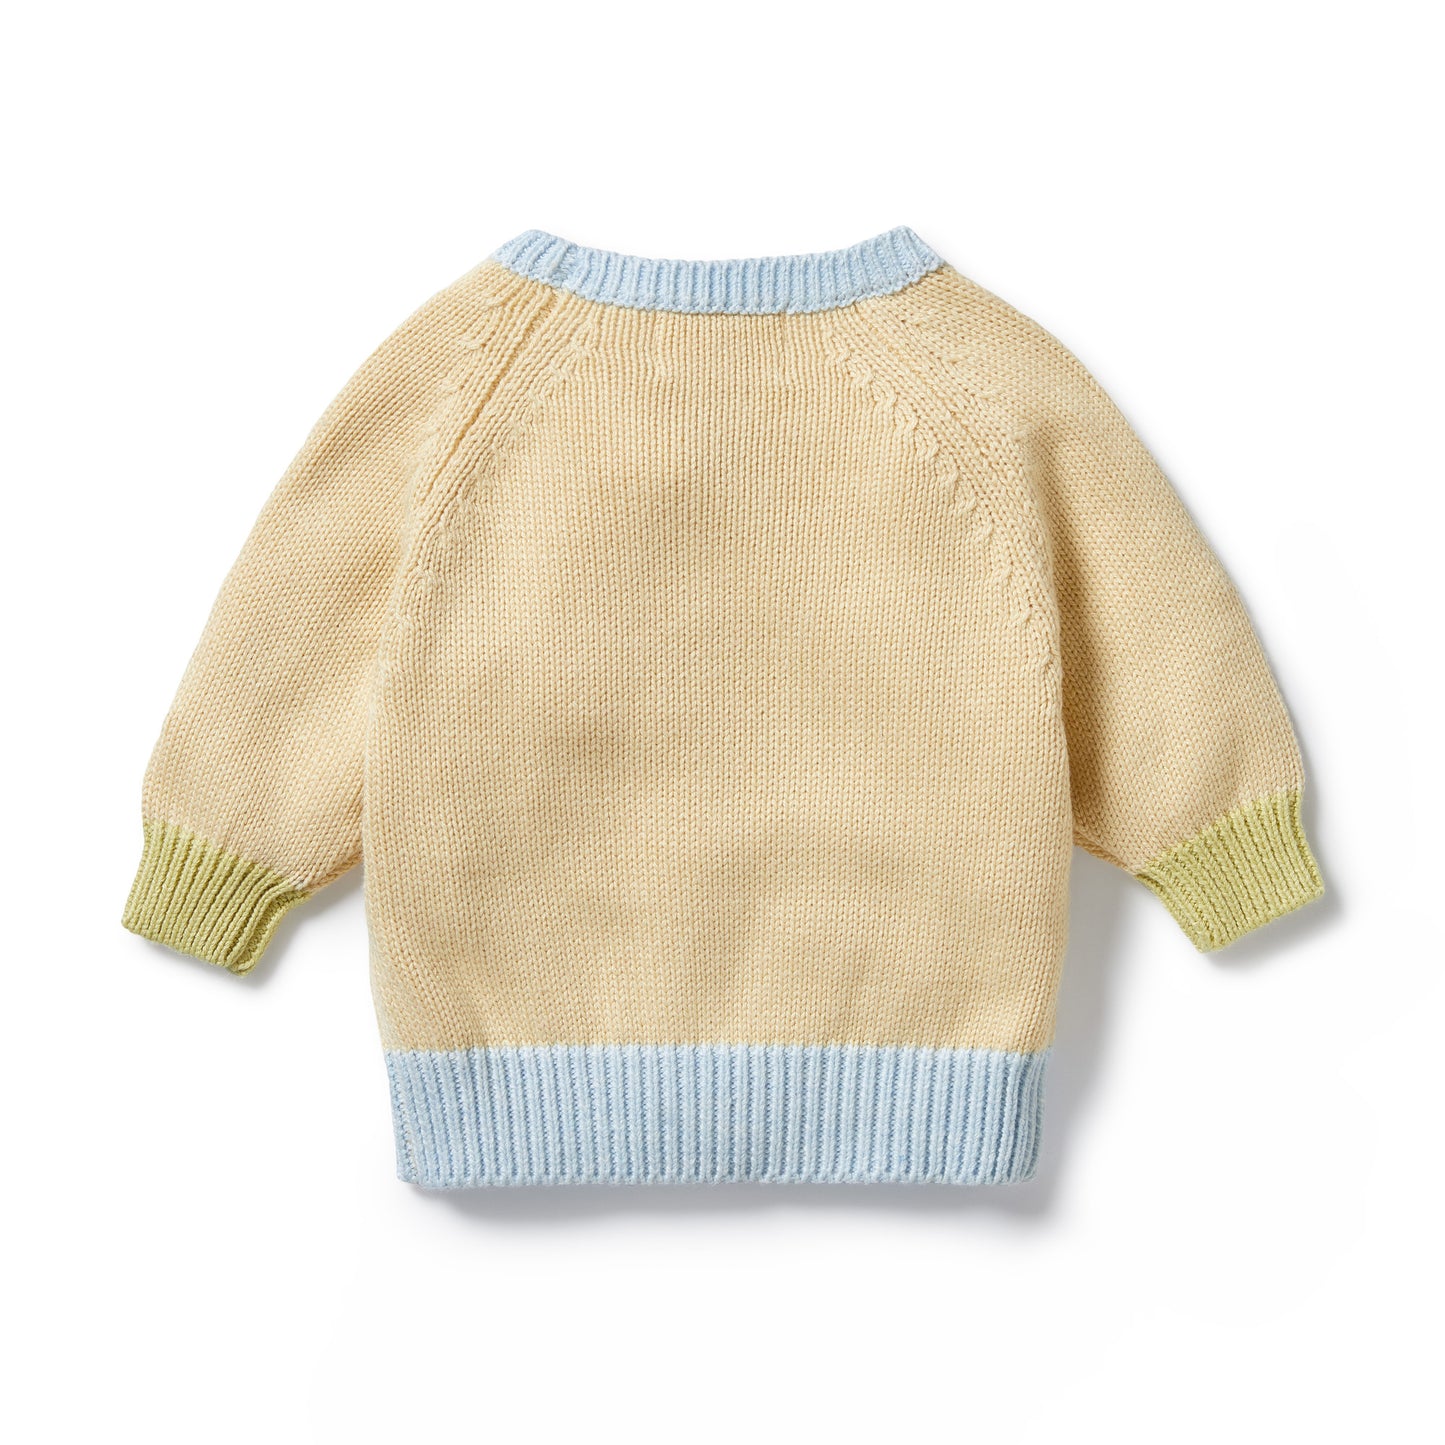 KNITTED JACQUARED JUMPER - DEW